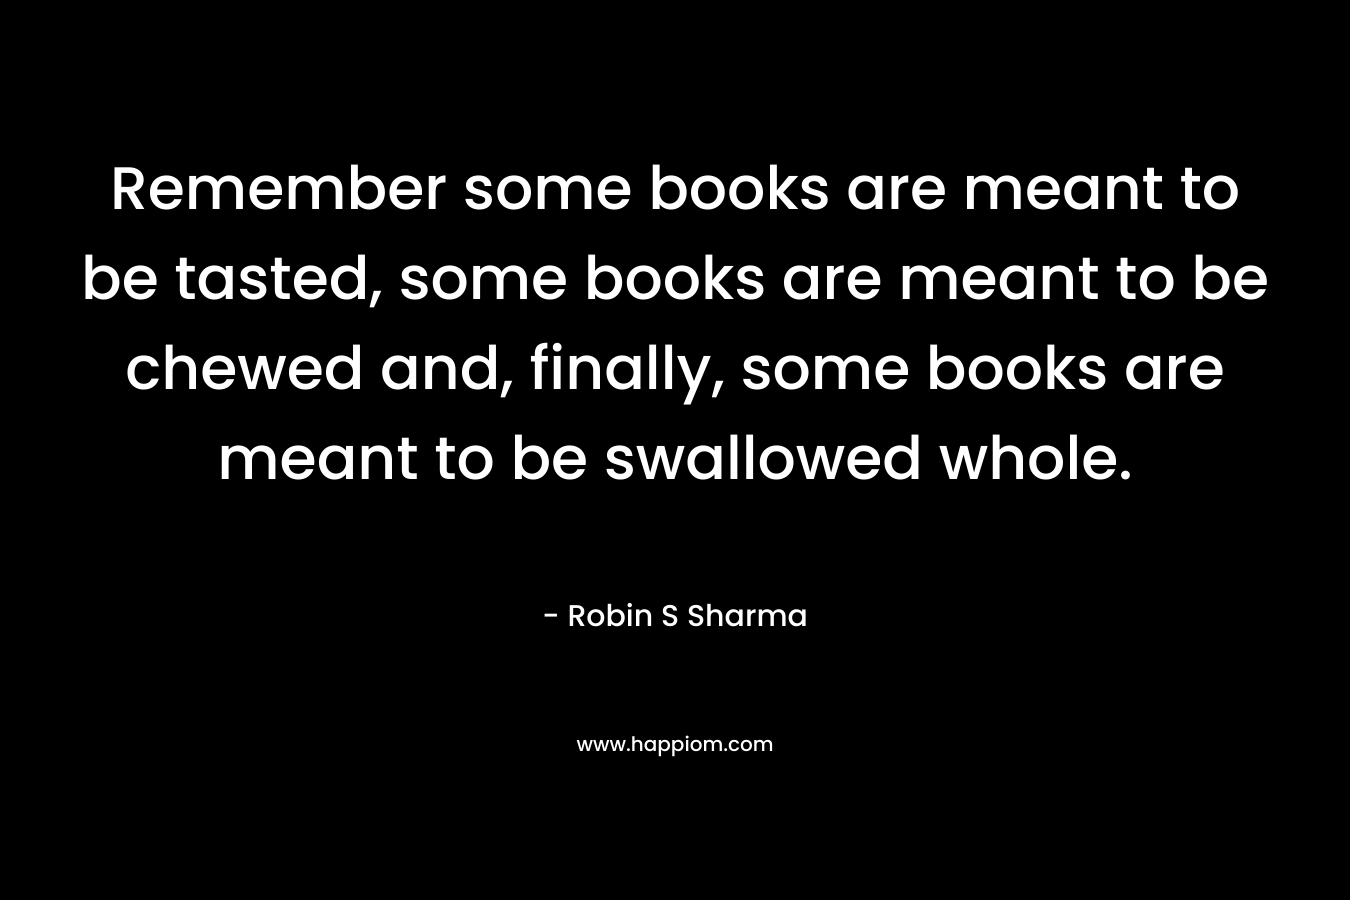 Remember some books are meant to be tasted, some books are meant to be chewed and, finally, some books are meant to be swallowed whole. – Robin S Sharma